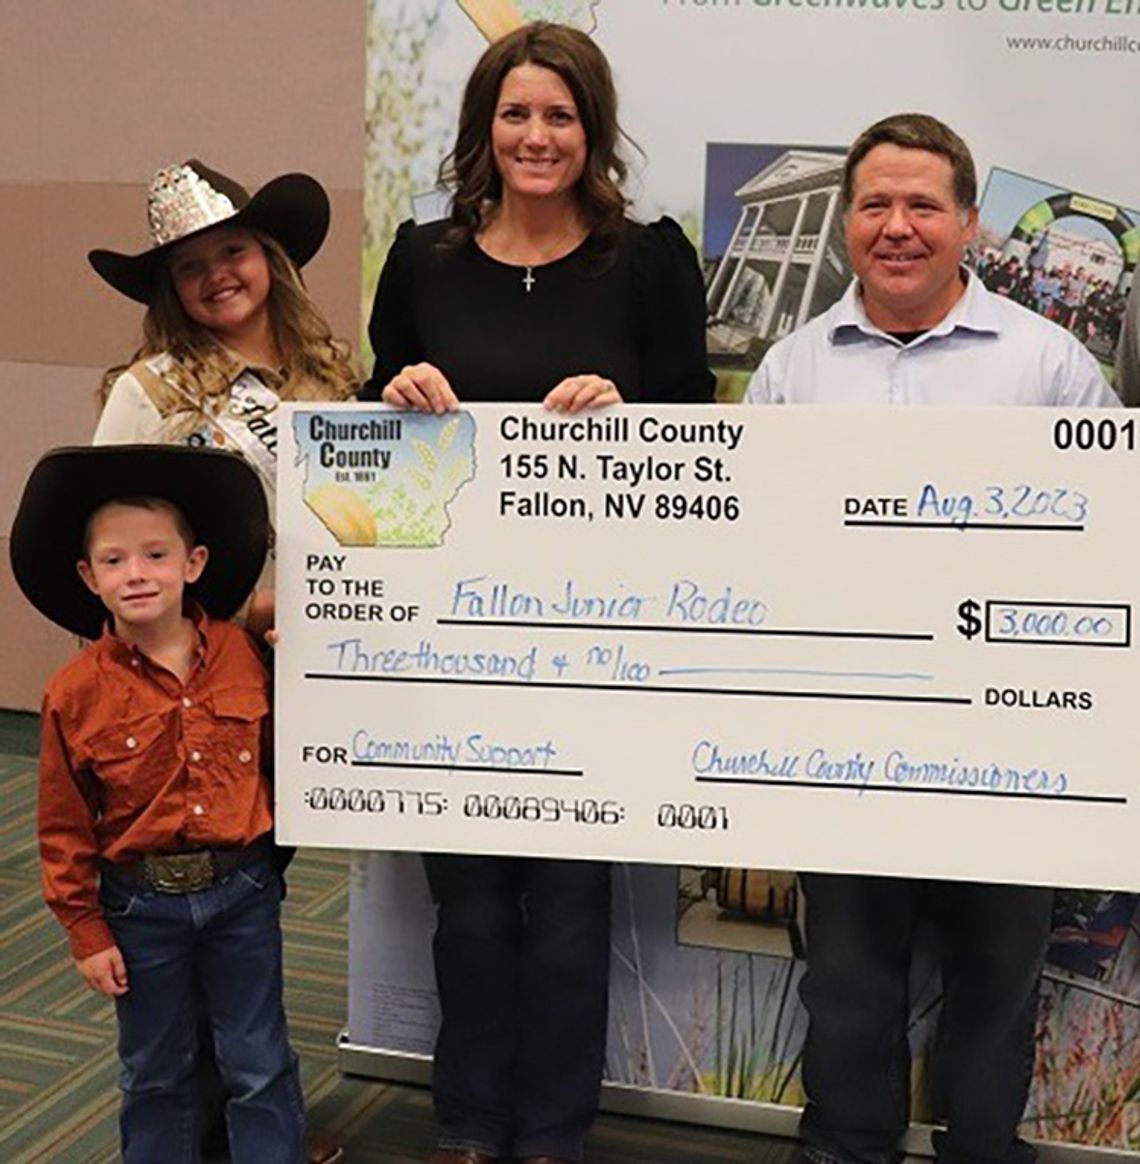 Fallon Junior Rodeo Receives Community Support Donation